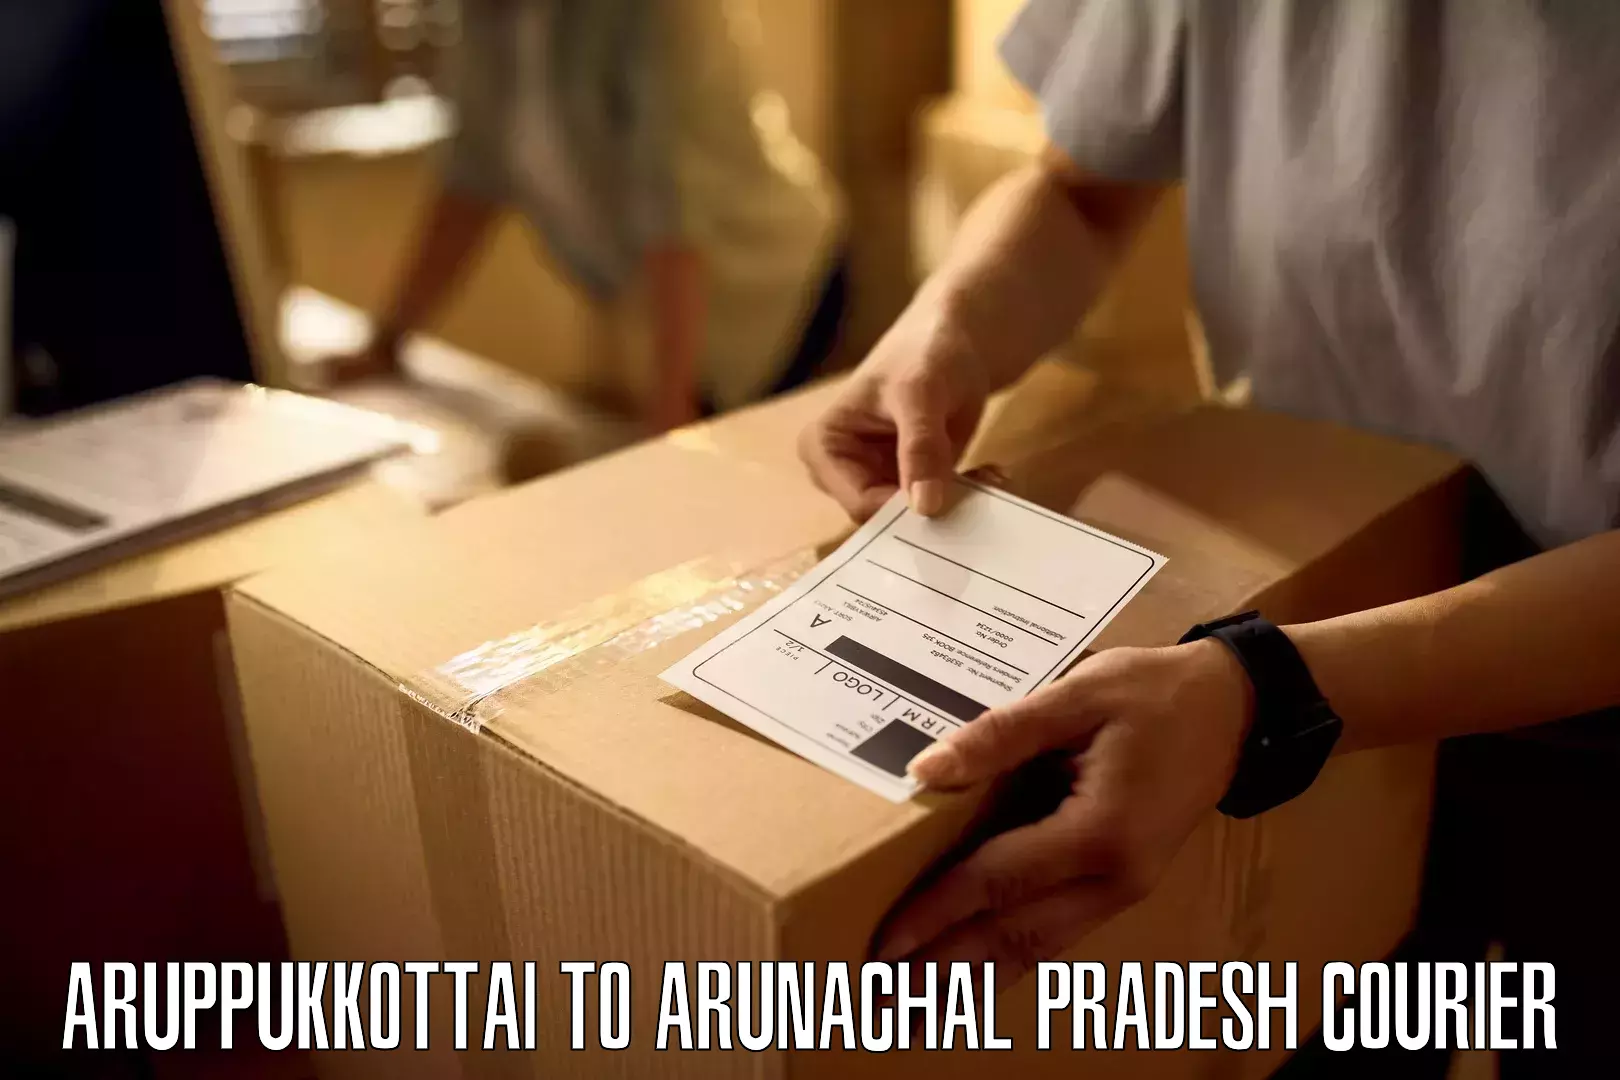 On-call courier service Aruppukkottai to Dirang